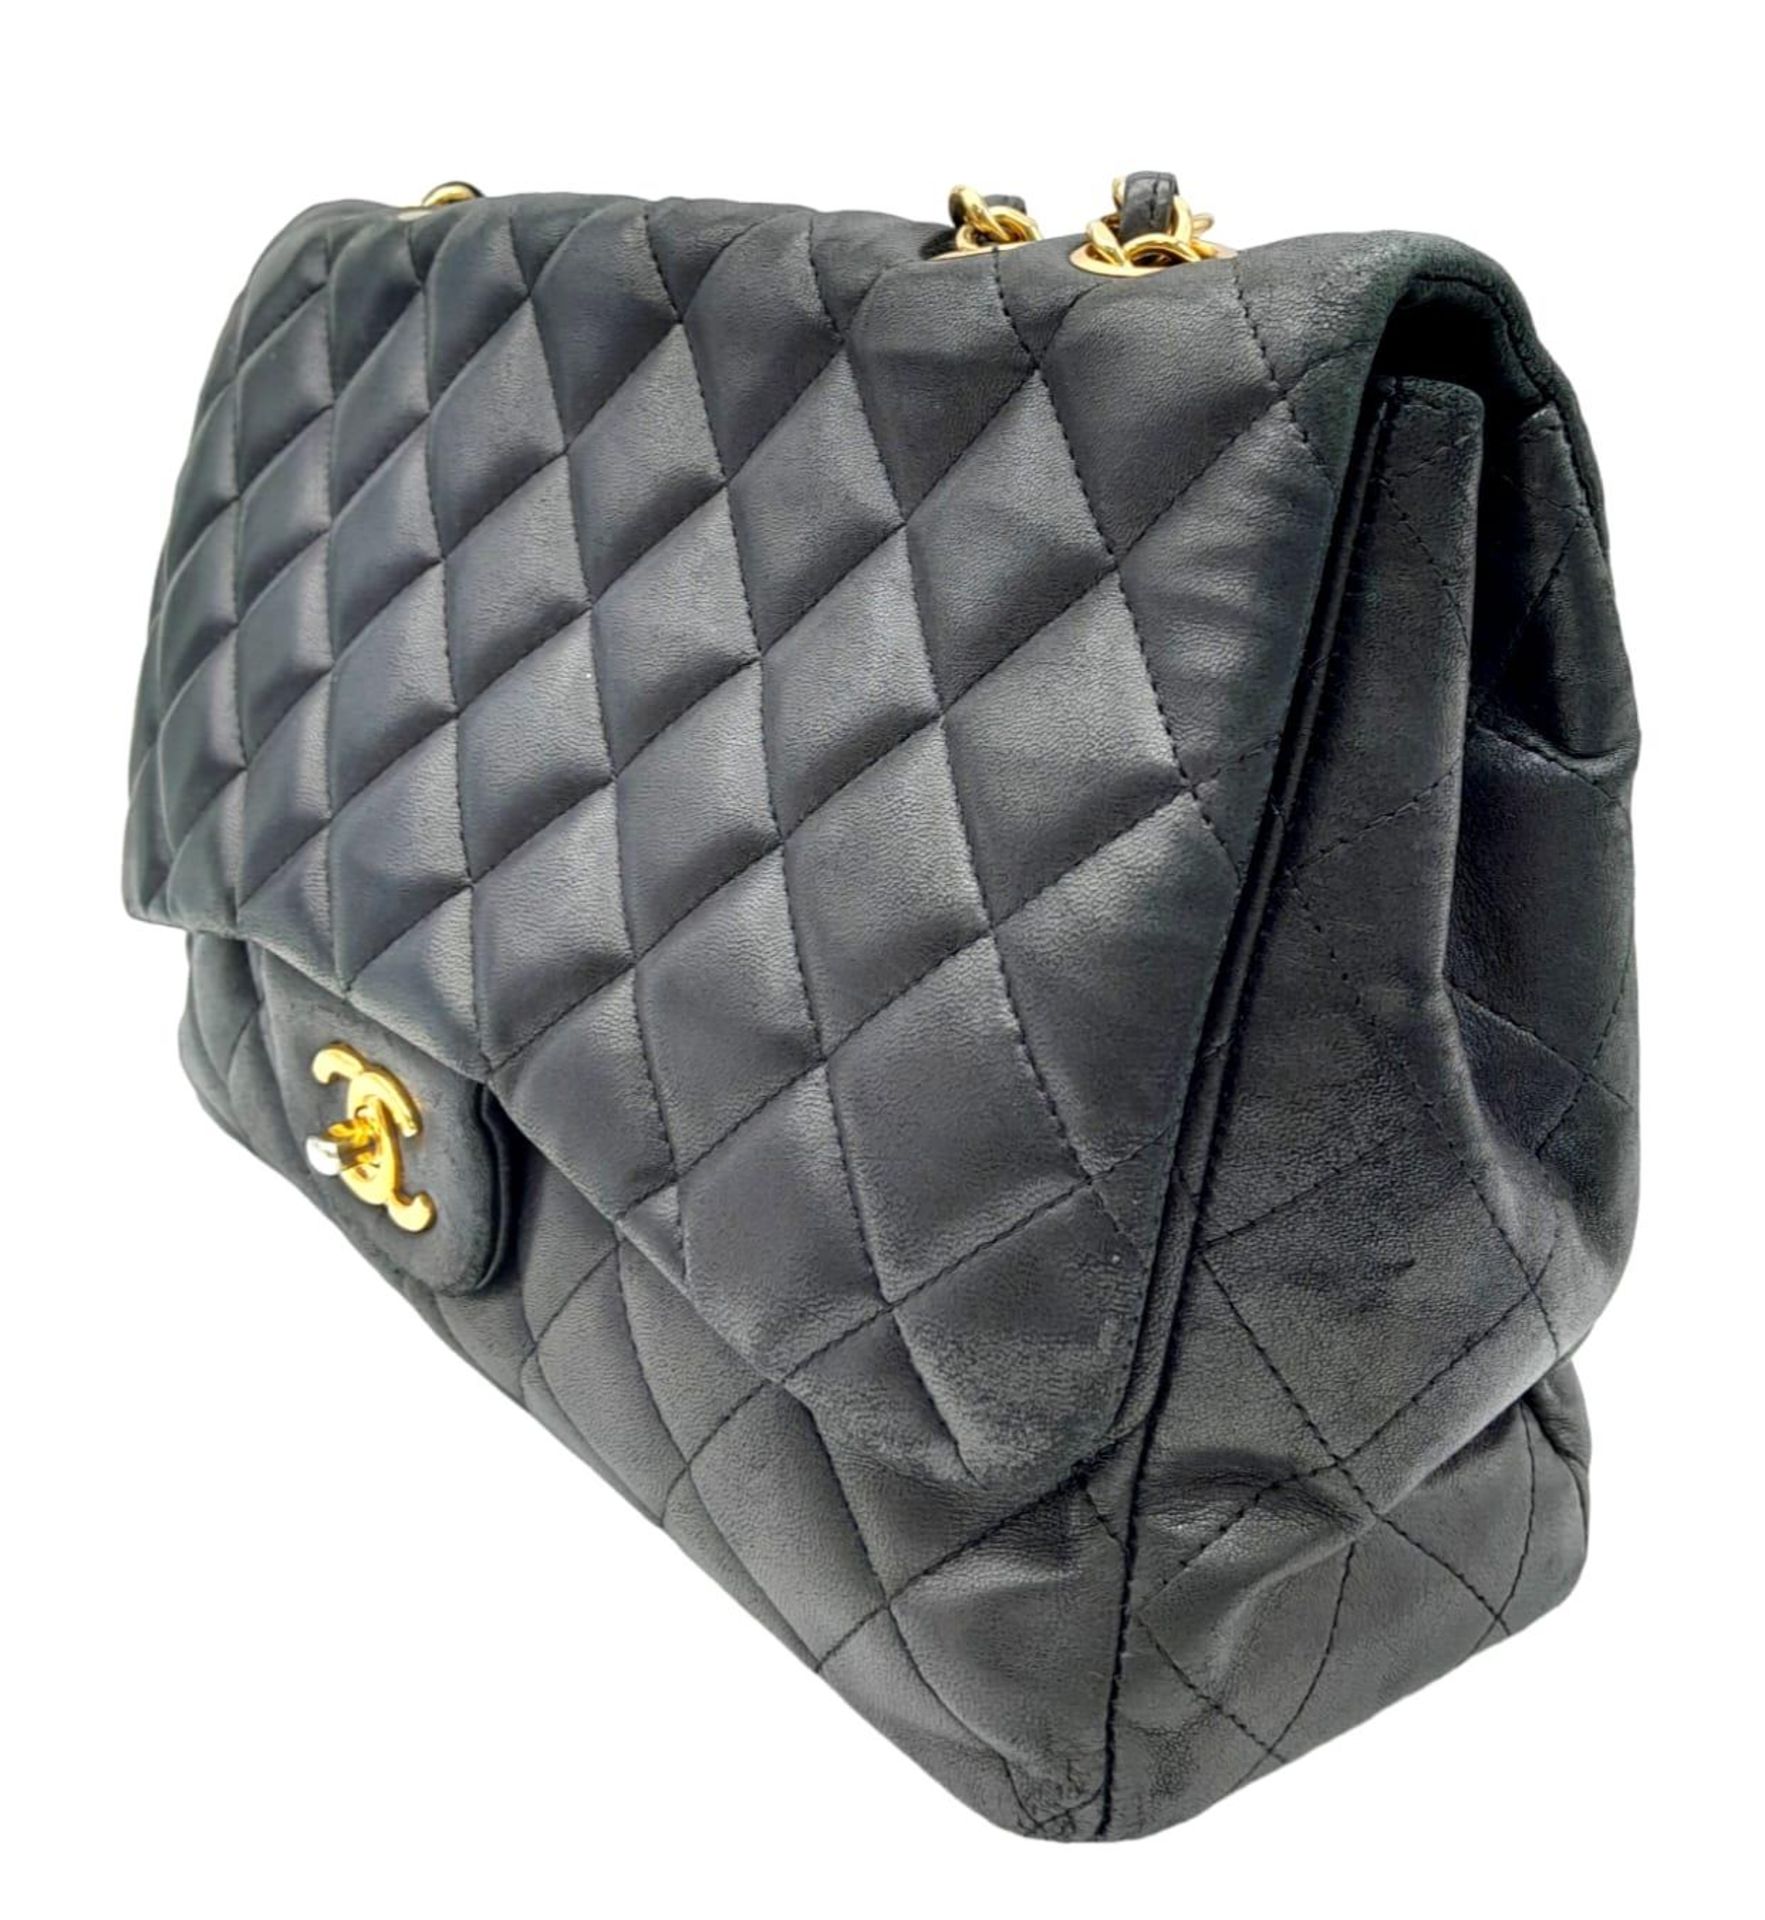 A Chanel Black Caviar Classic Single Flap Bag. Quilted pebbled leather exterior with gold-toned - Image 5 of 19